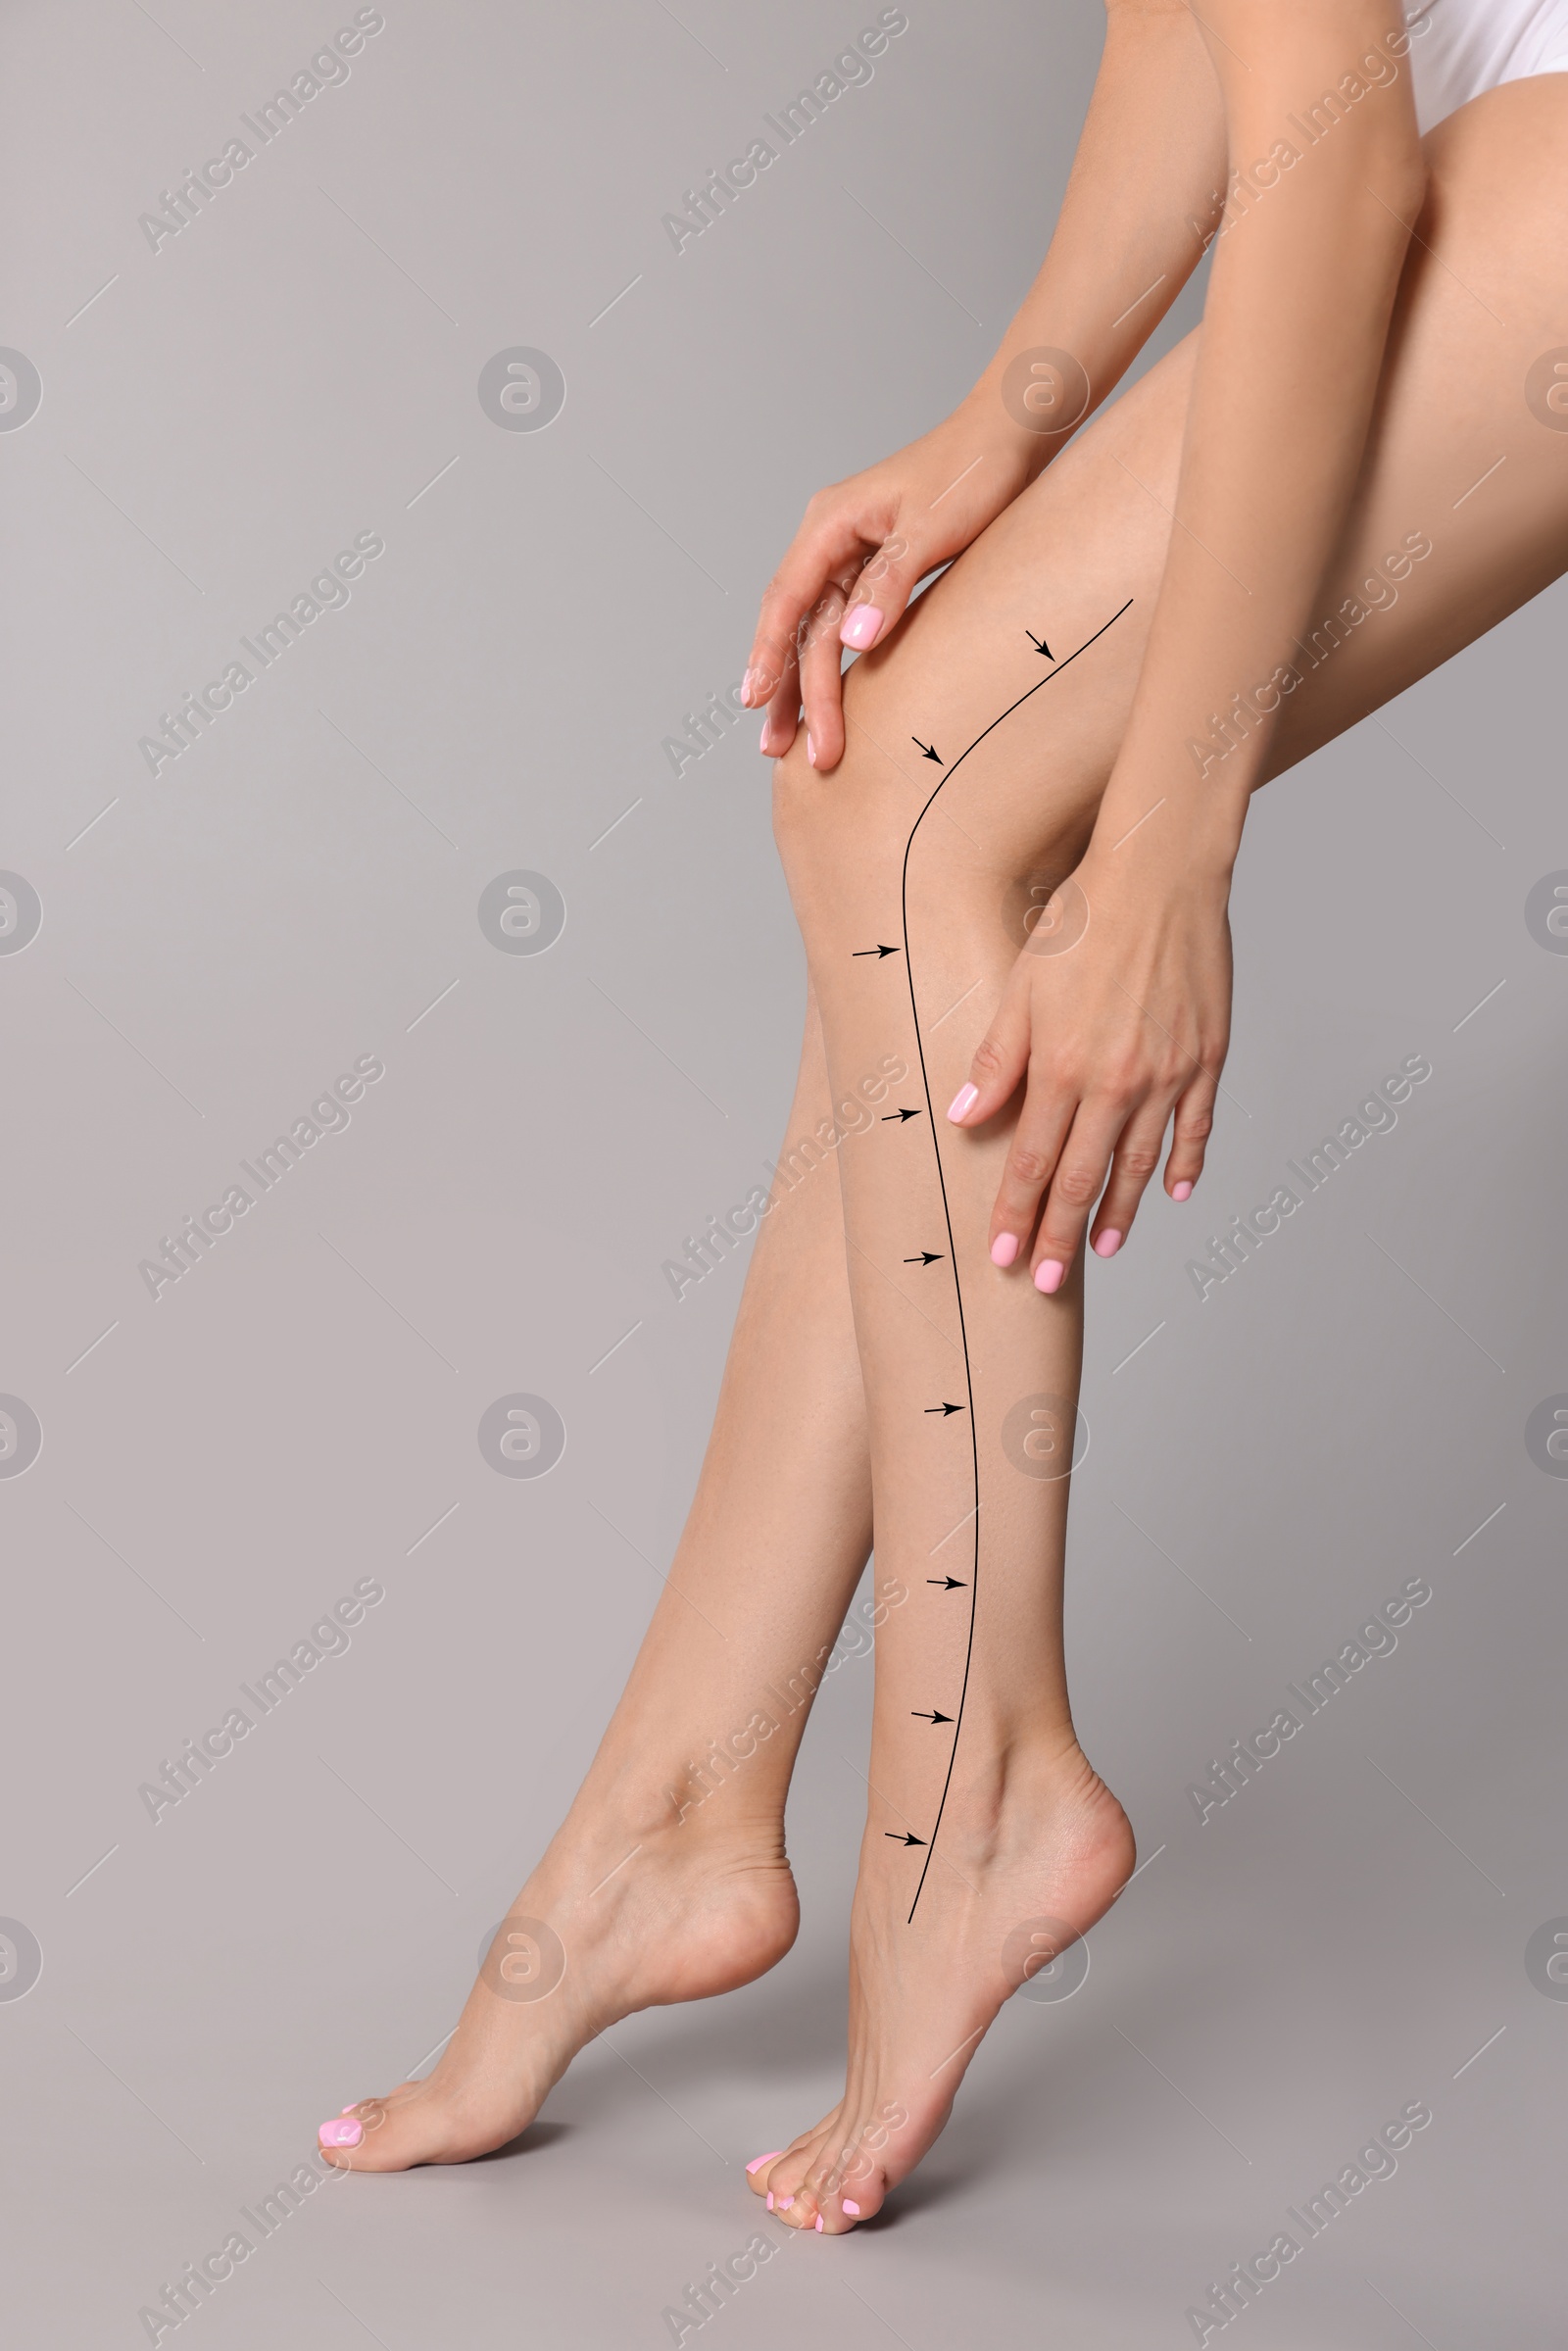 Image of Epilation guide - how to remove hair in proper direction. Woman with drawn lines and arrows on her beautiful smooth legs against light grey background